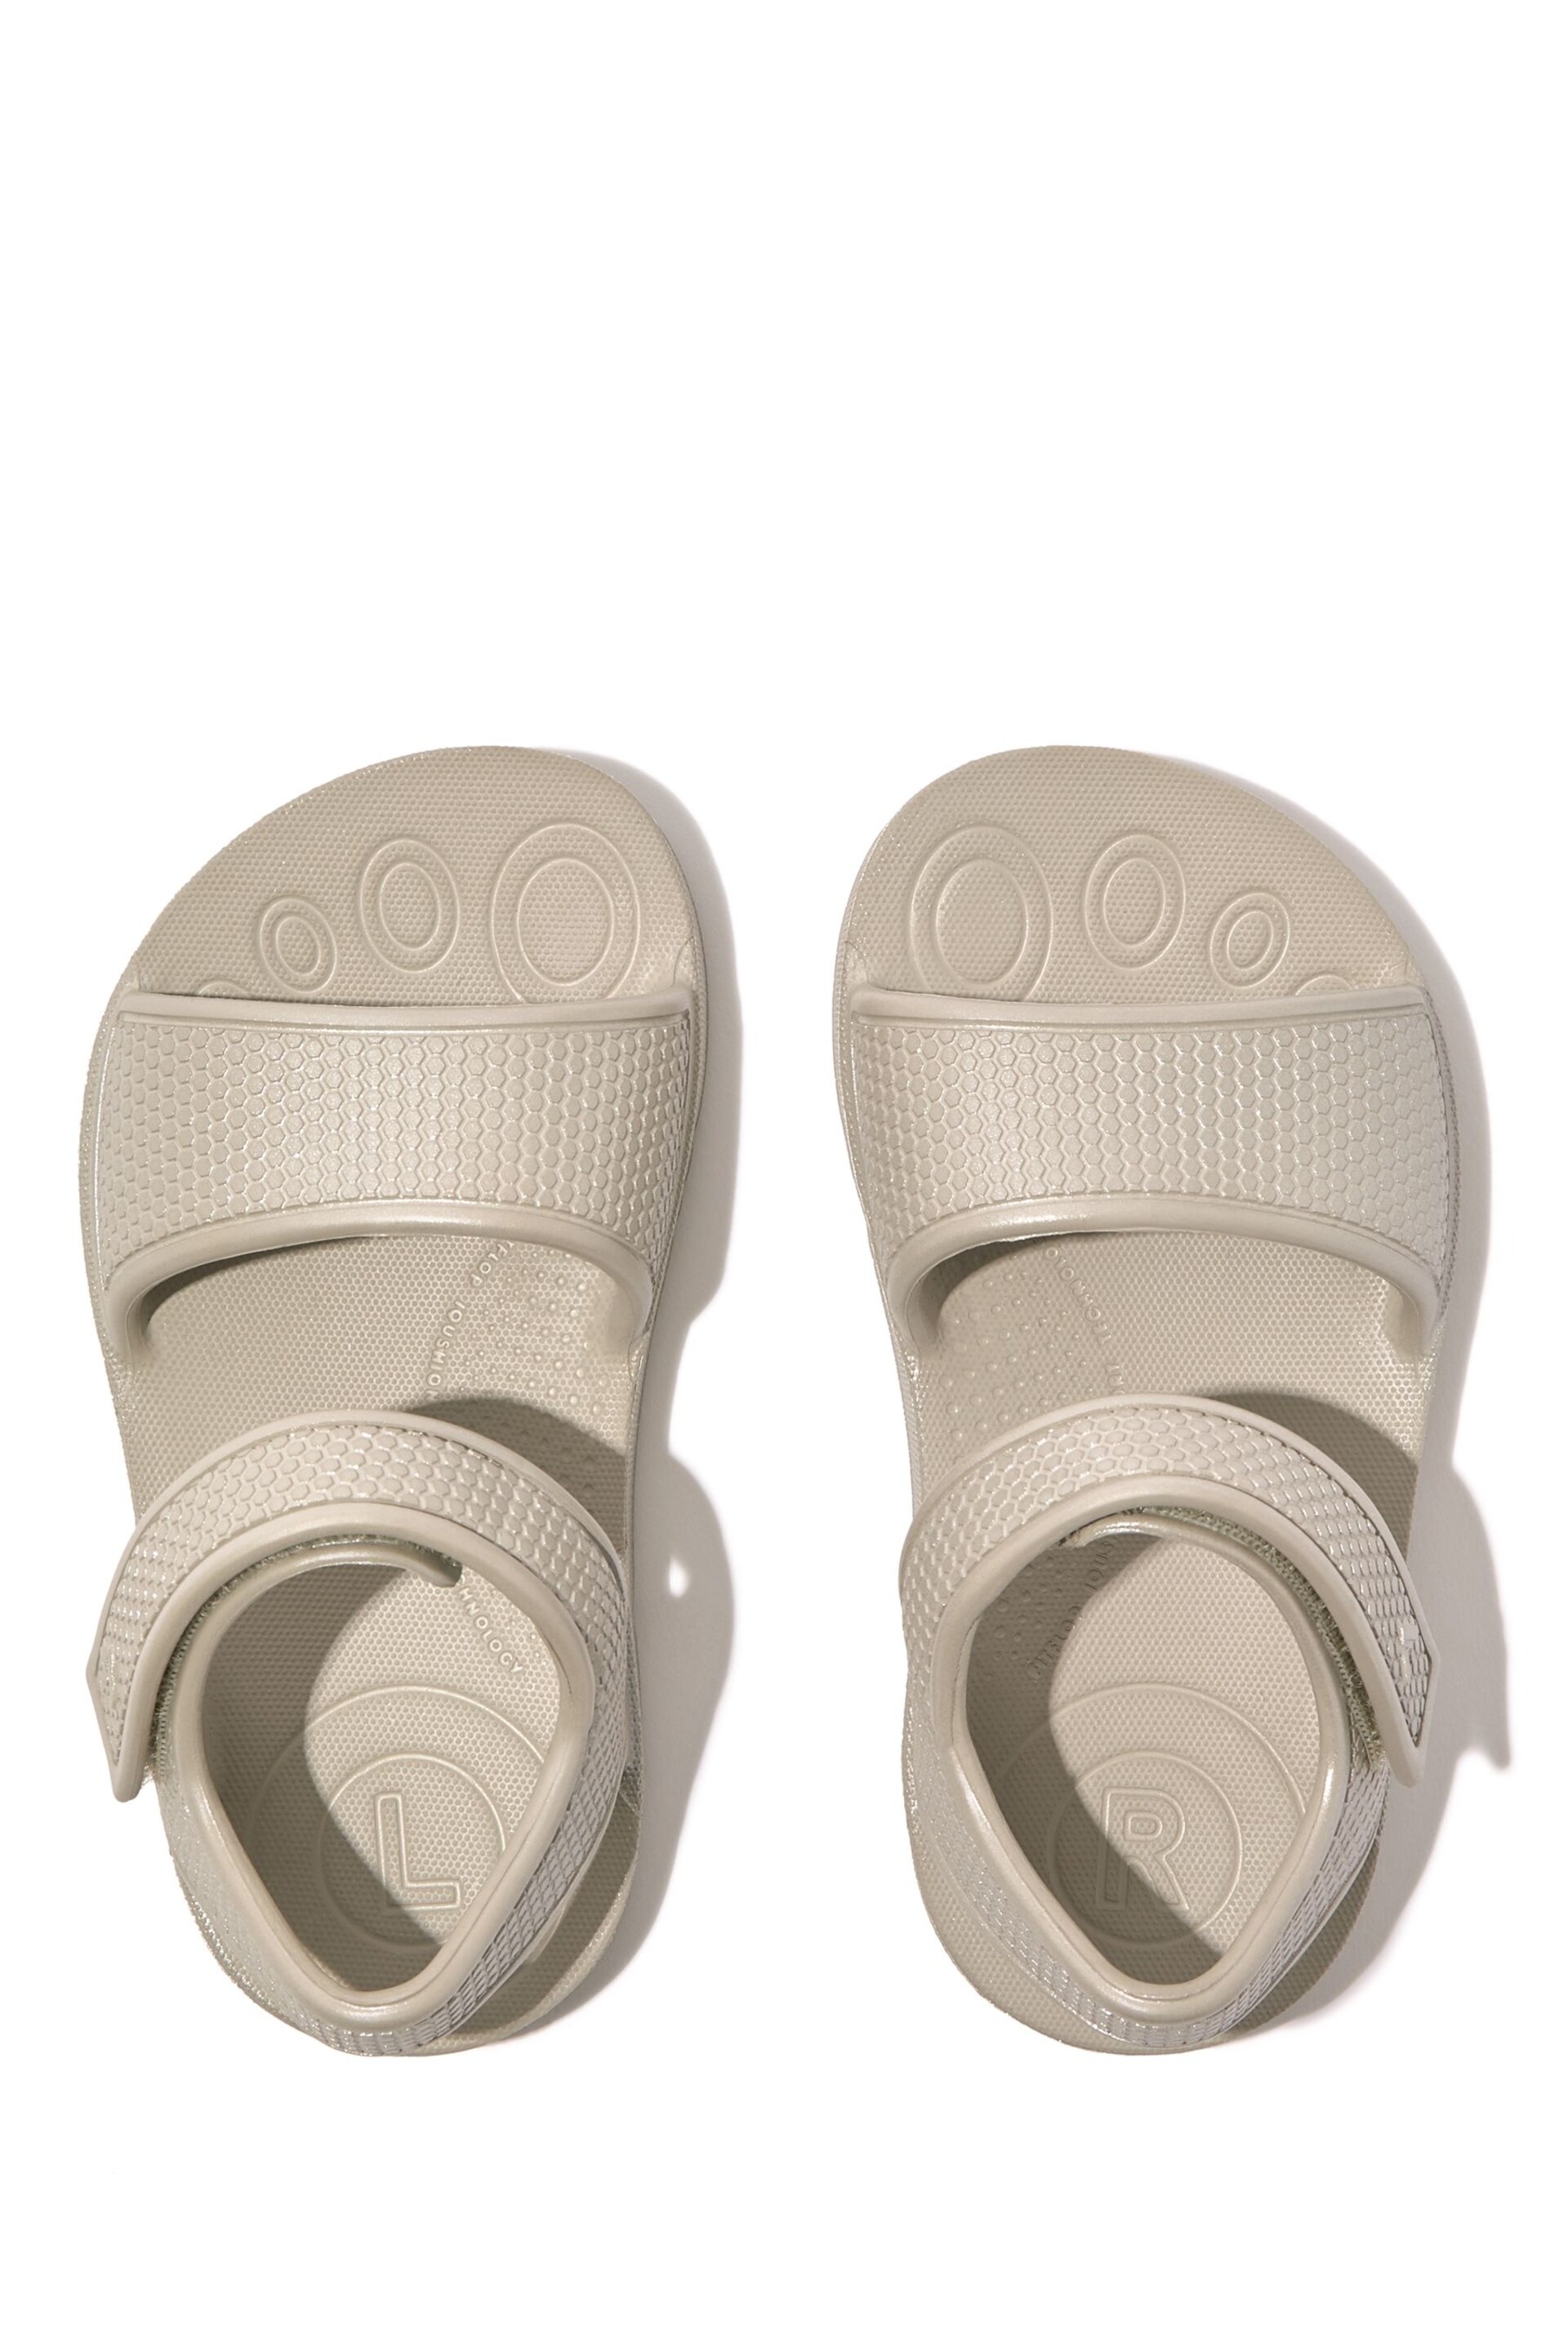 FitFlop Kids Toddler Silver iqushion Shimmer Ergonomic Sandals - Image 3 of 4